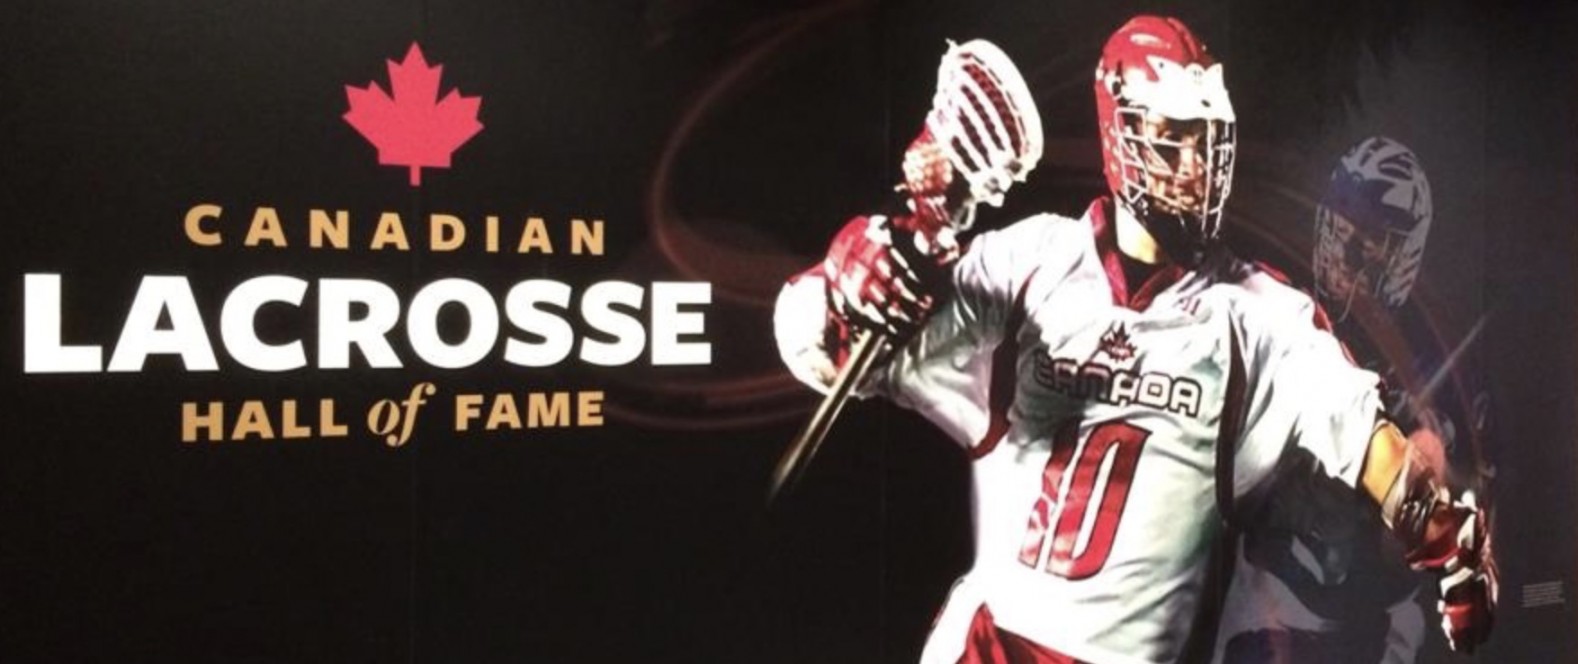 Canadian Lacrosse Hall of Fame